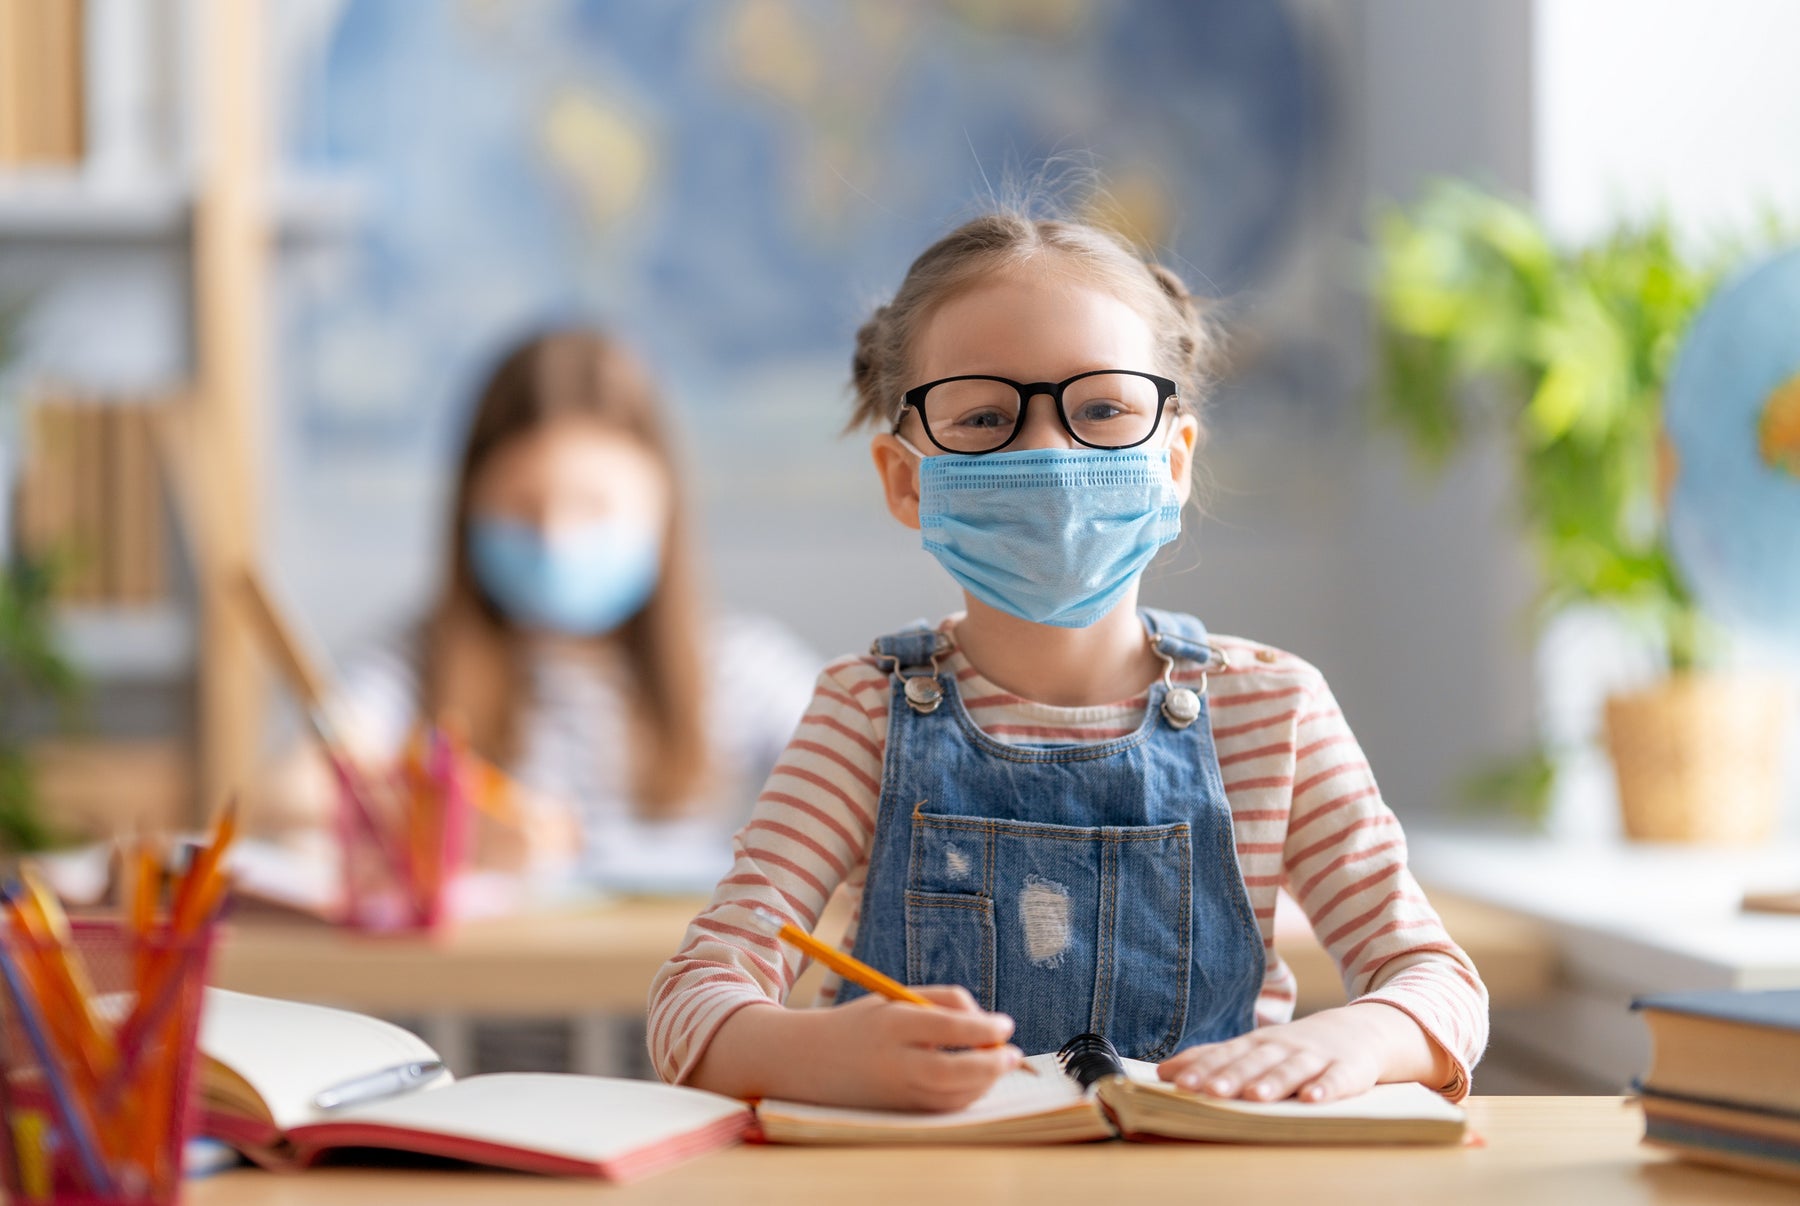 Important Tips to Help Kids Wear Face Masks During Covid19